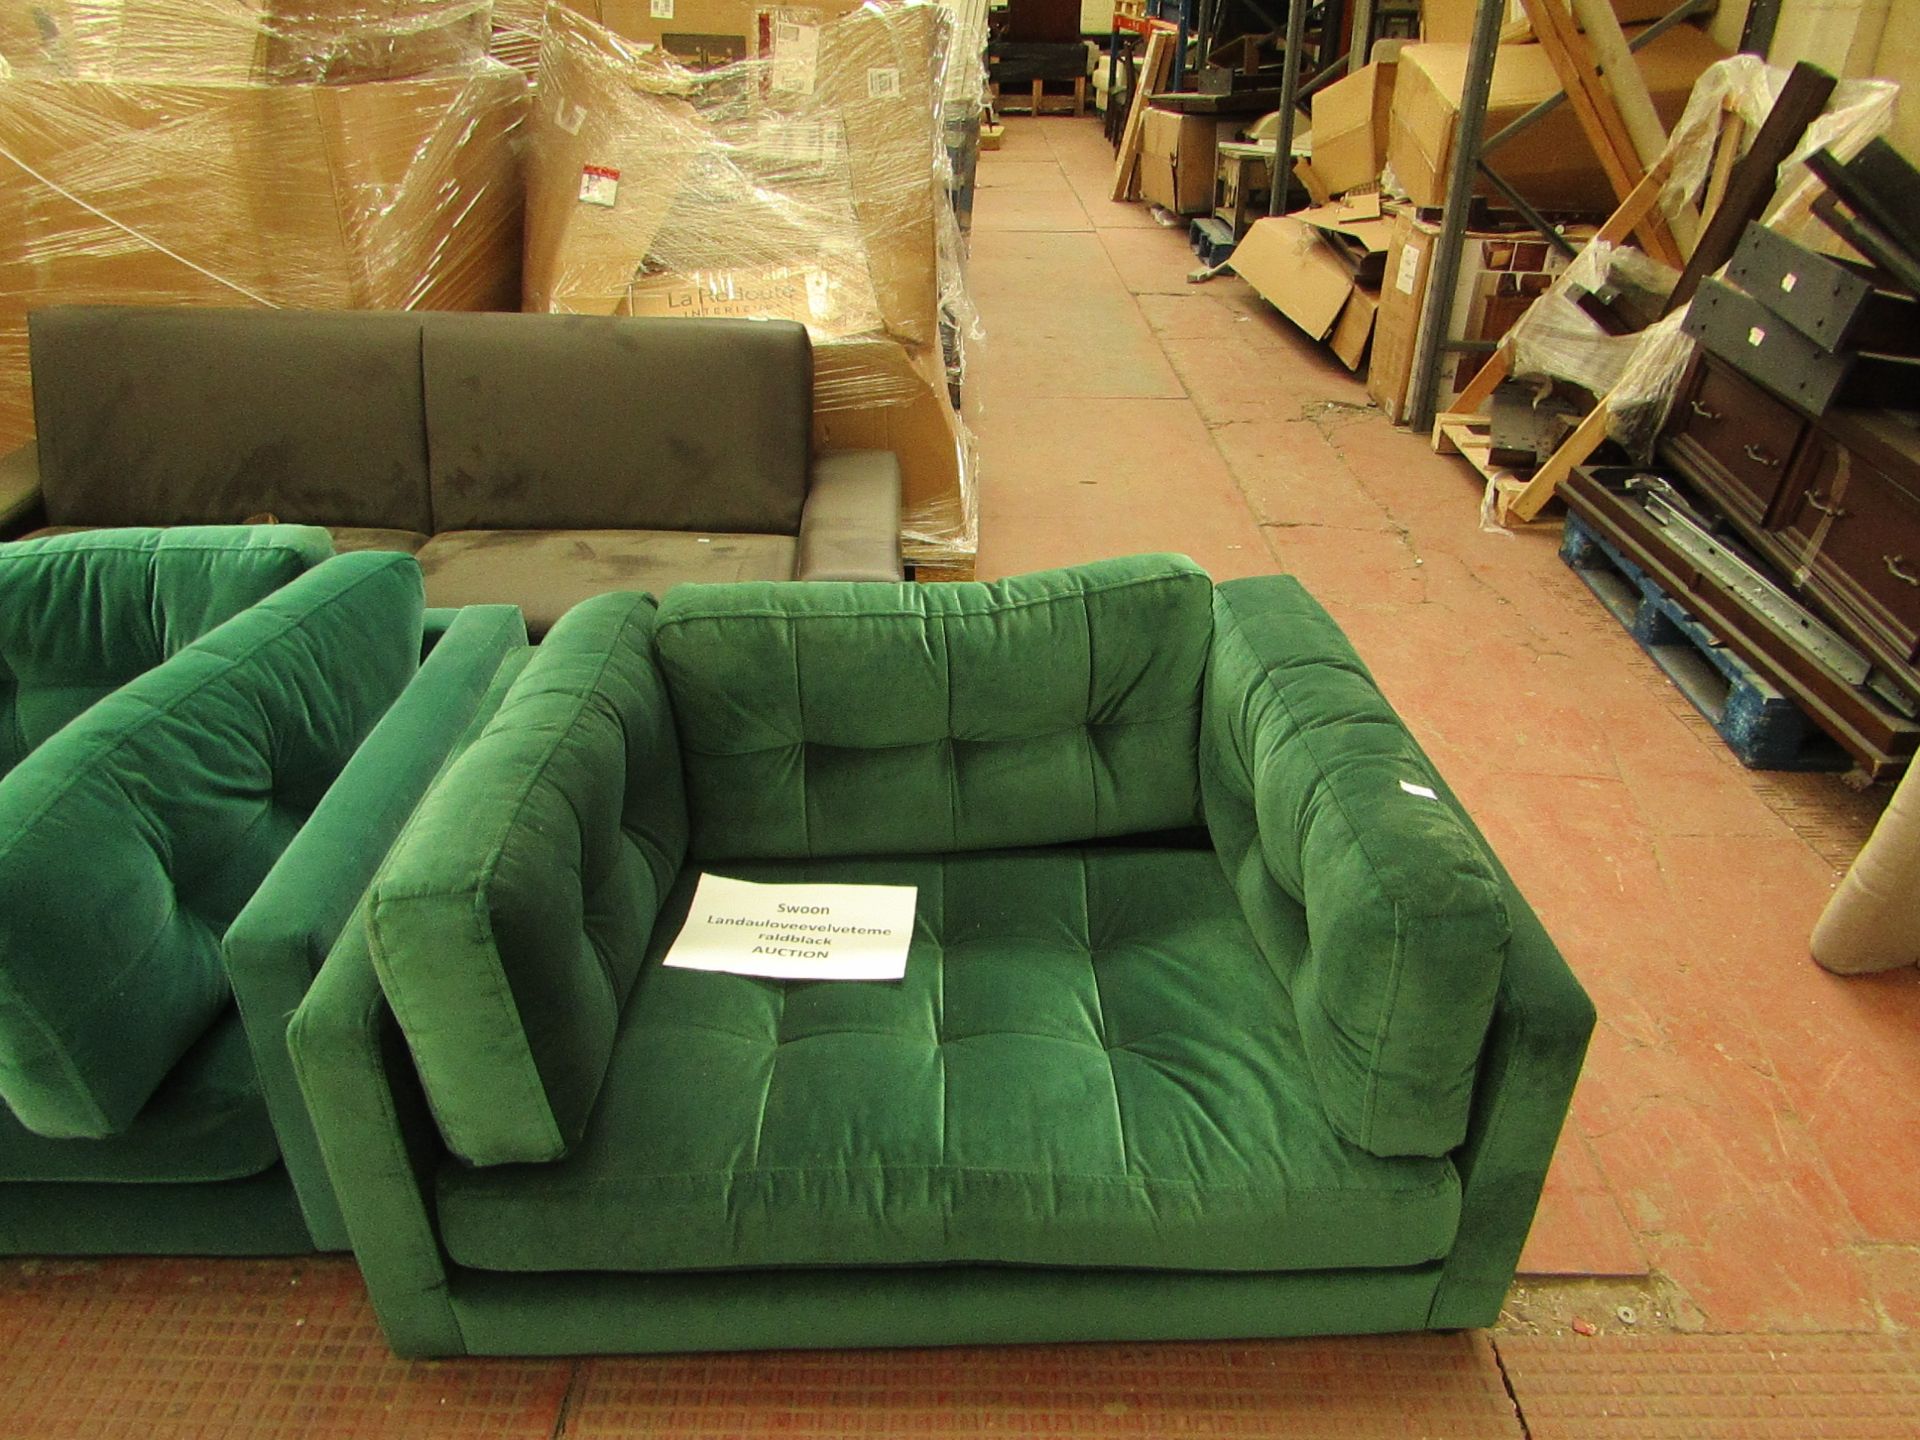 | 1X | SWOON EMERALD GREEN ARM CHAIR | REQUIRES A CLEAN BUT OTHER THAN THAT APPEARS TO BE IN GOOD